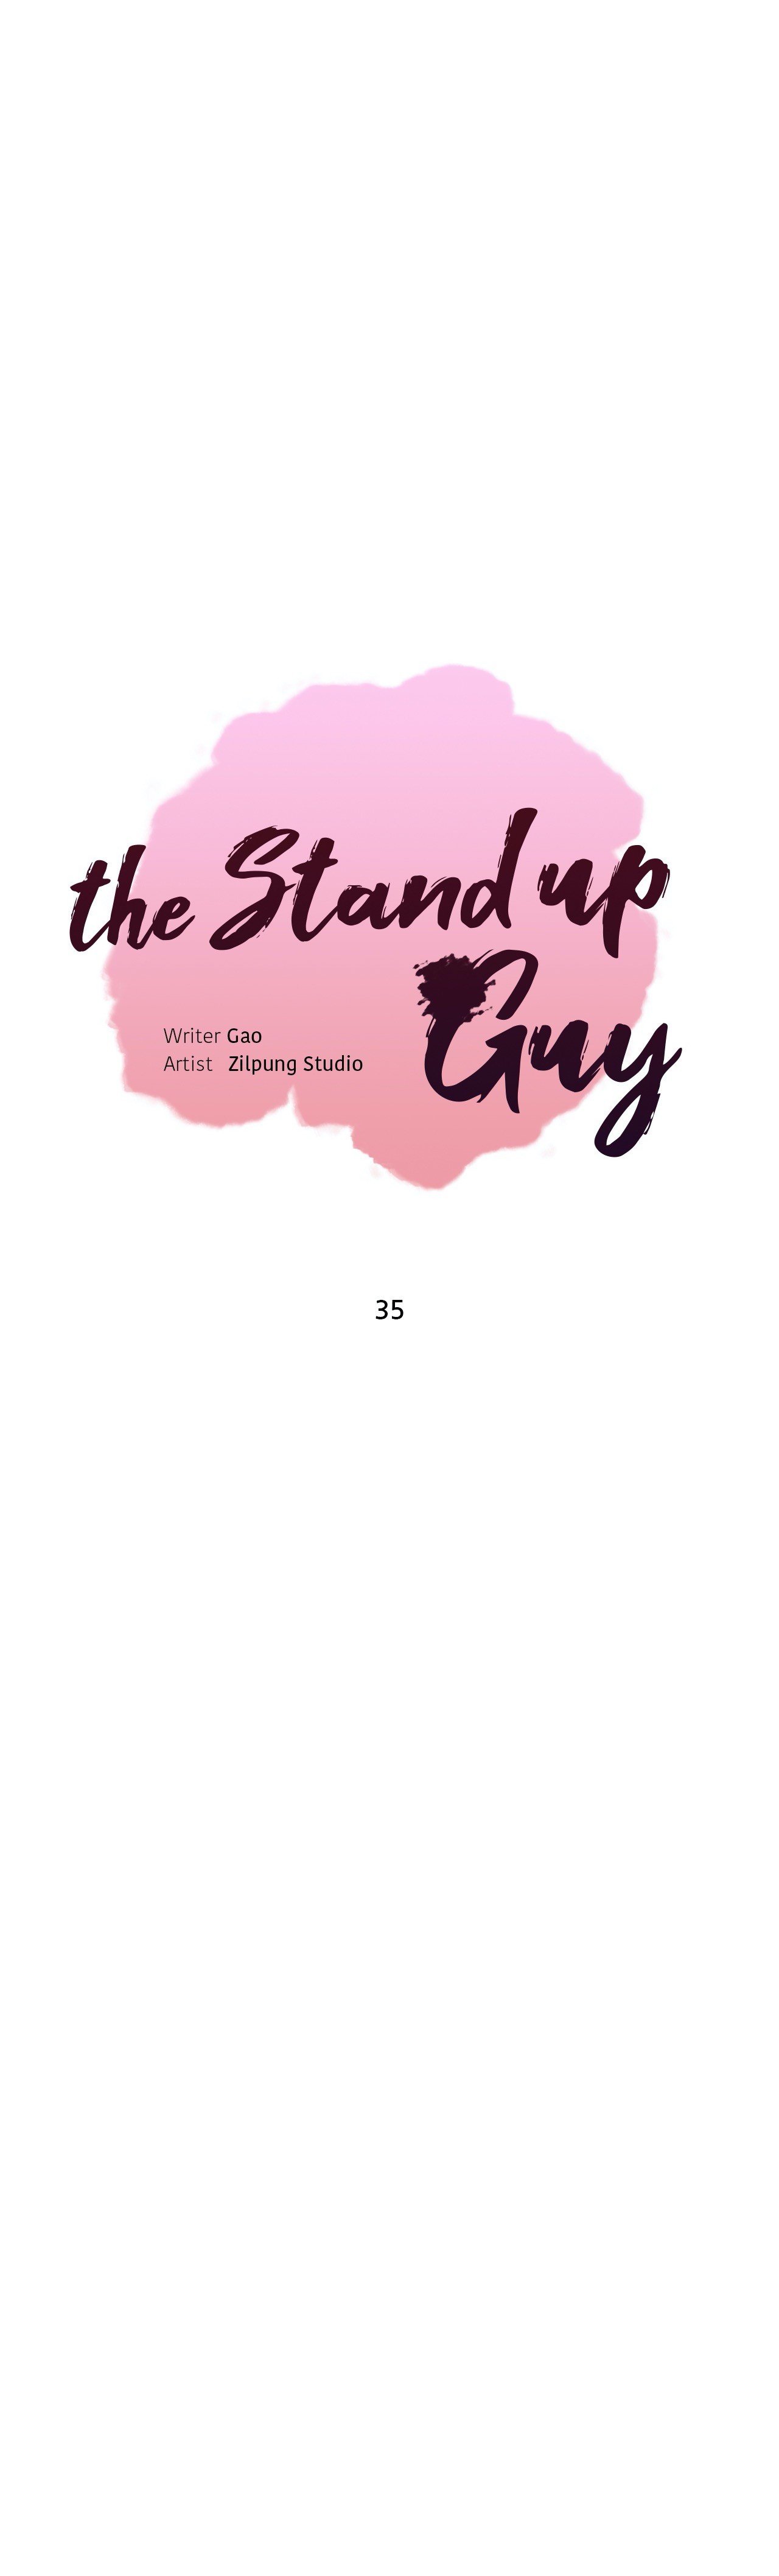 the-stand-up-guy-chap-35-0